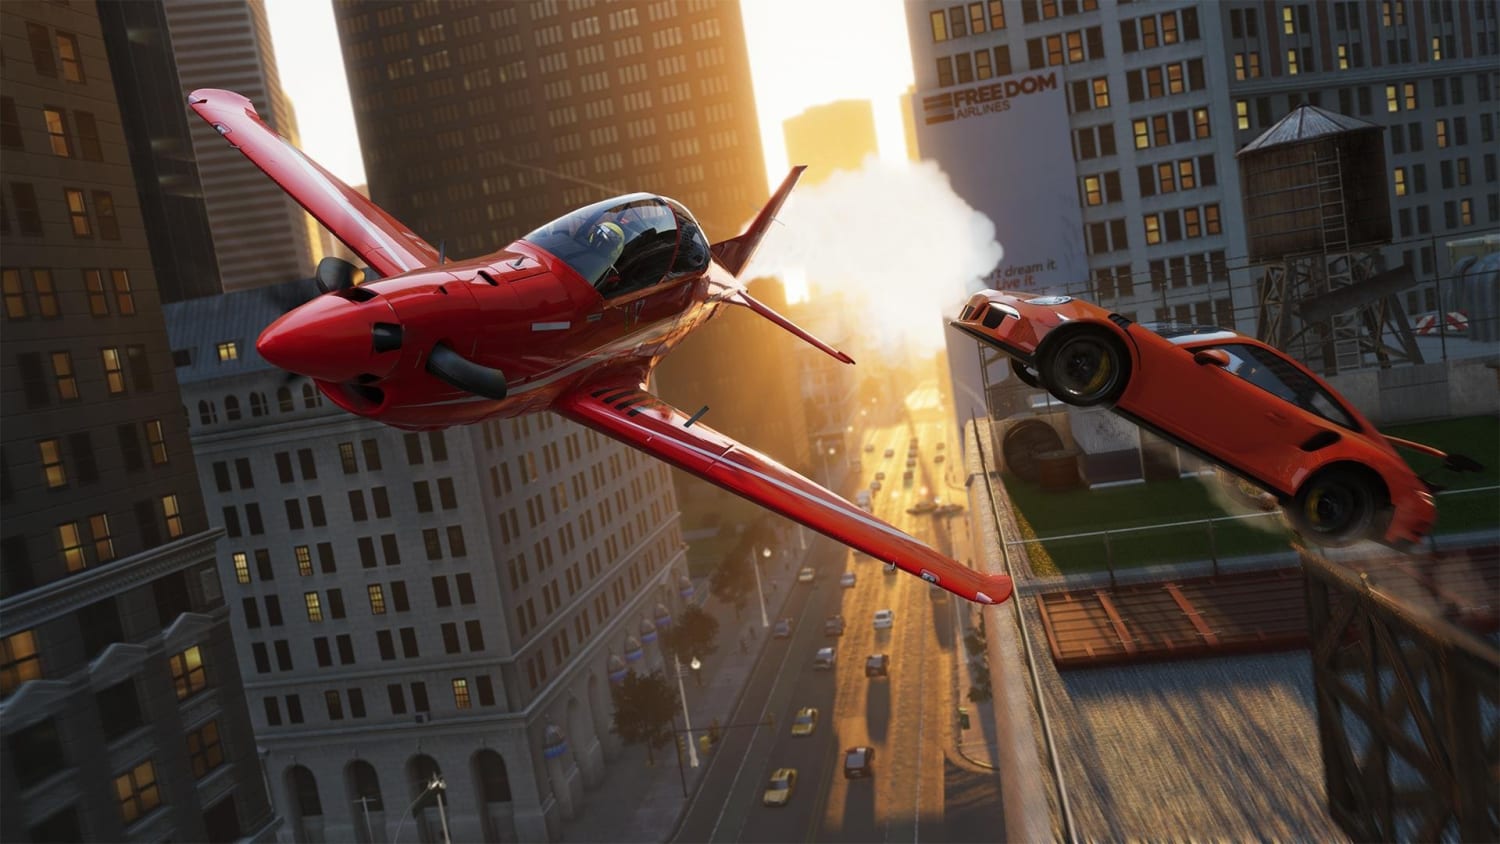 The Crew 2 tips PS4, Xbox One, PC